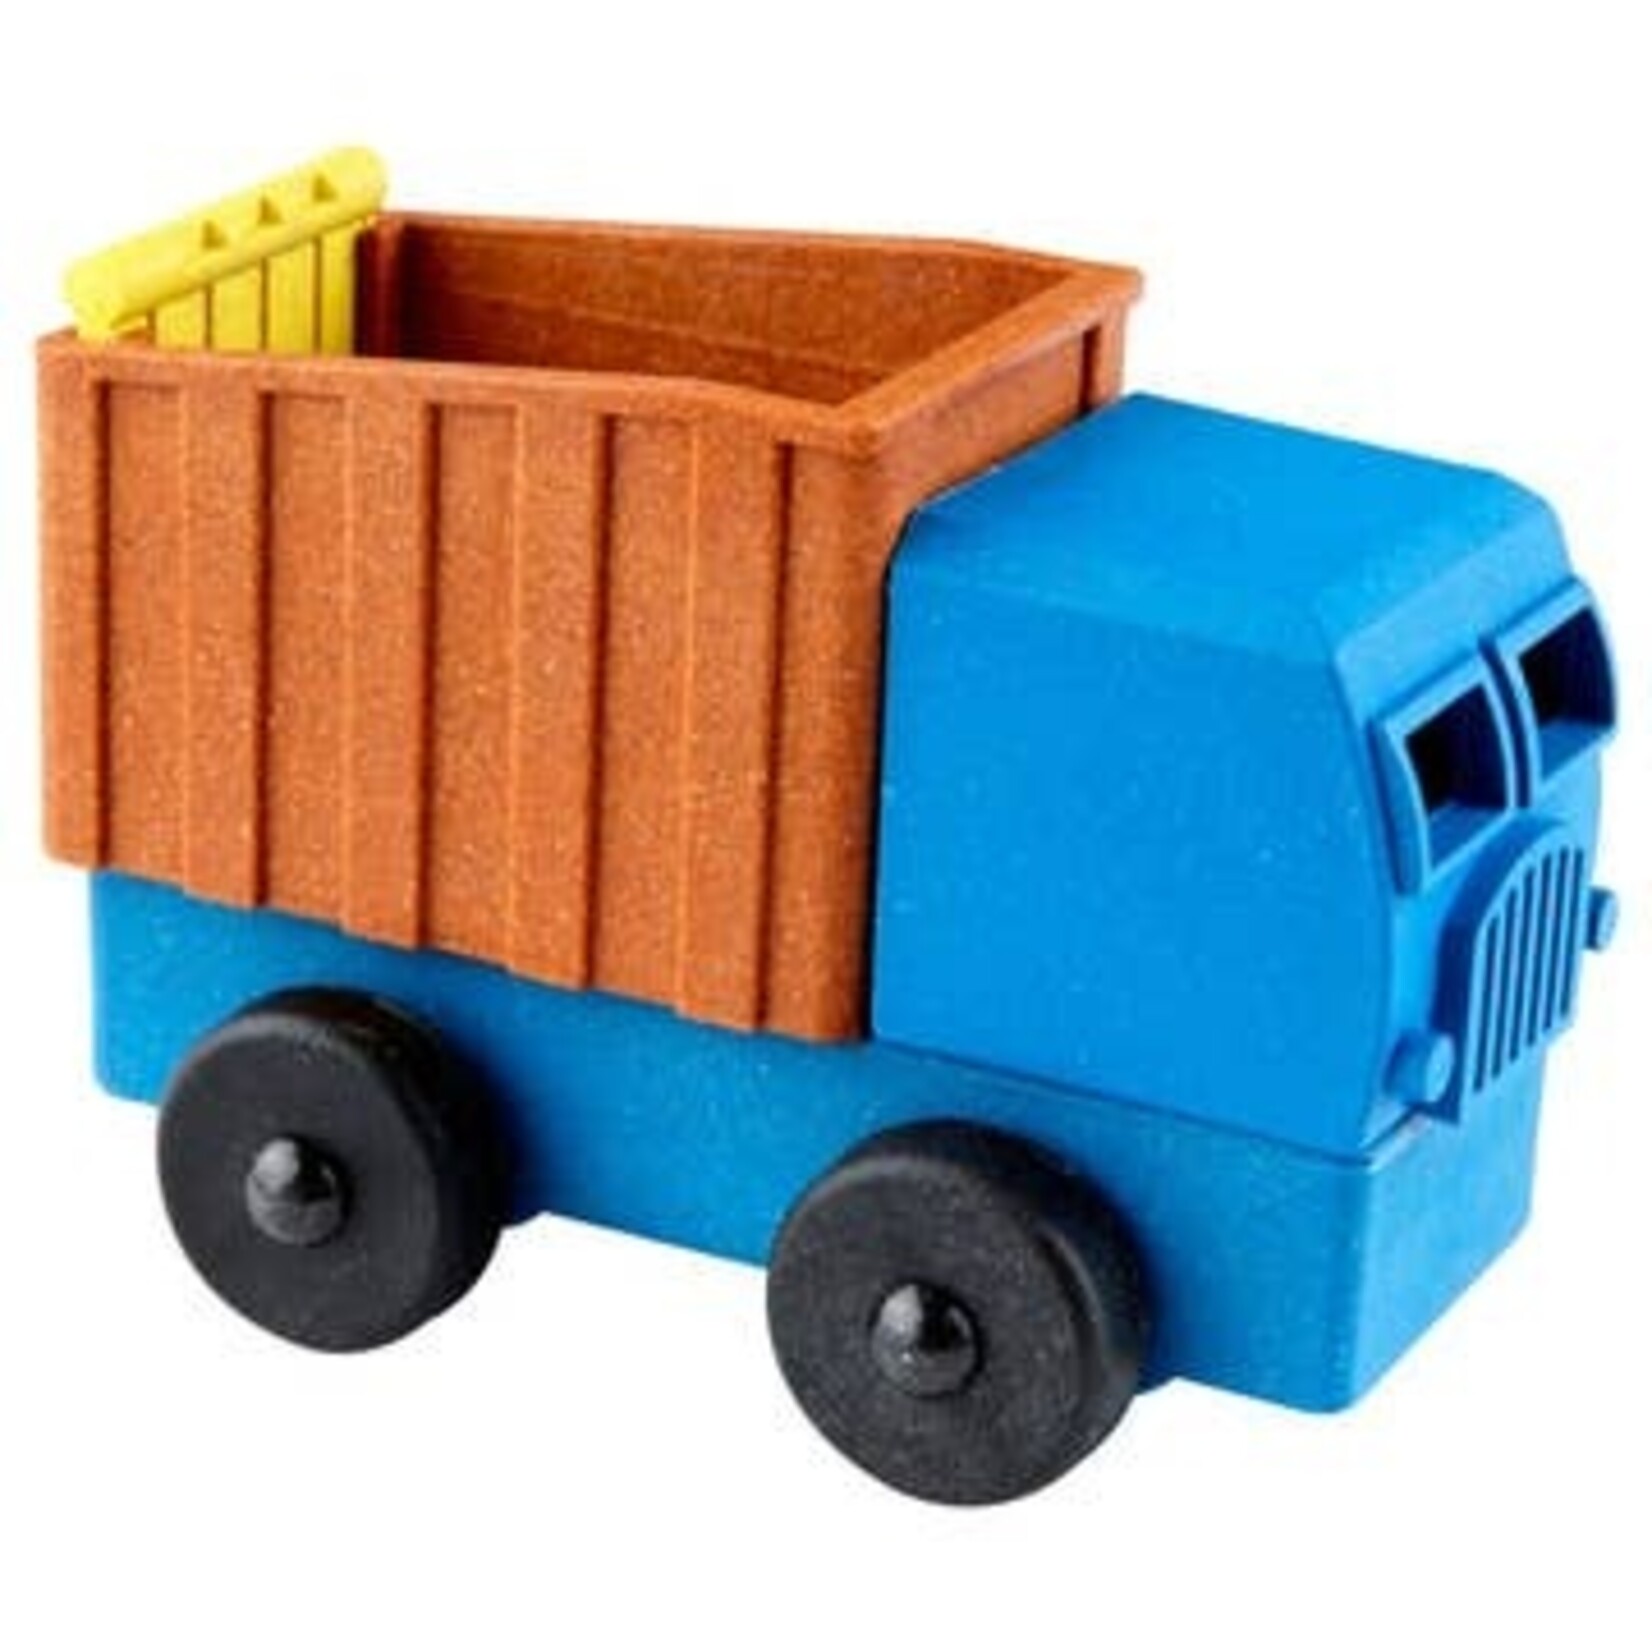 Luke's Toy Truck Collection